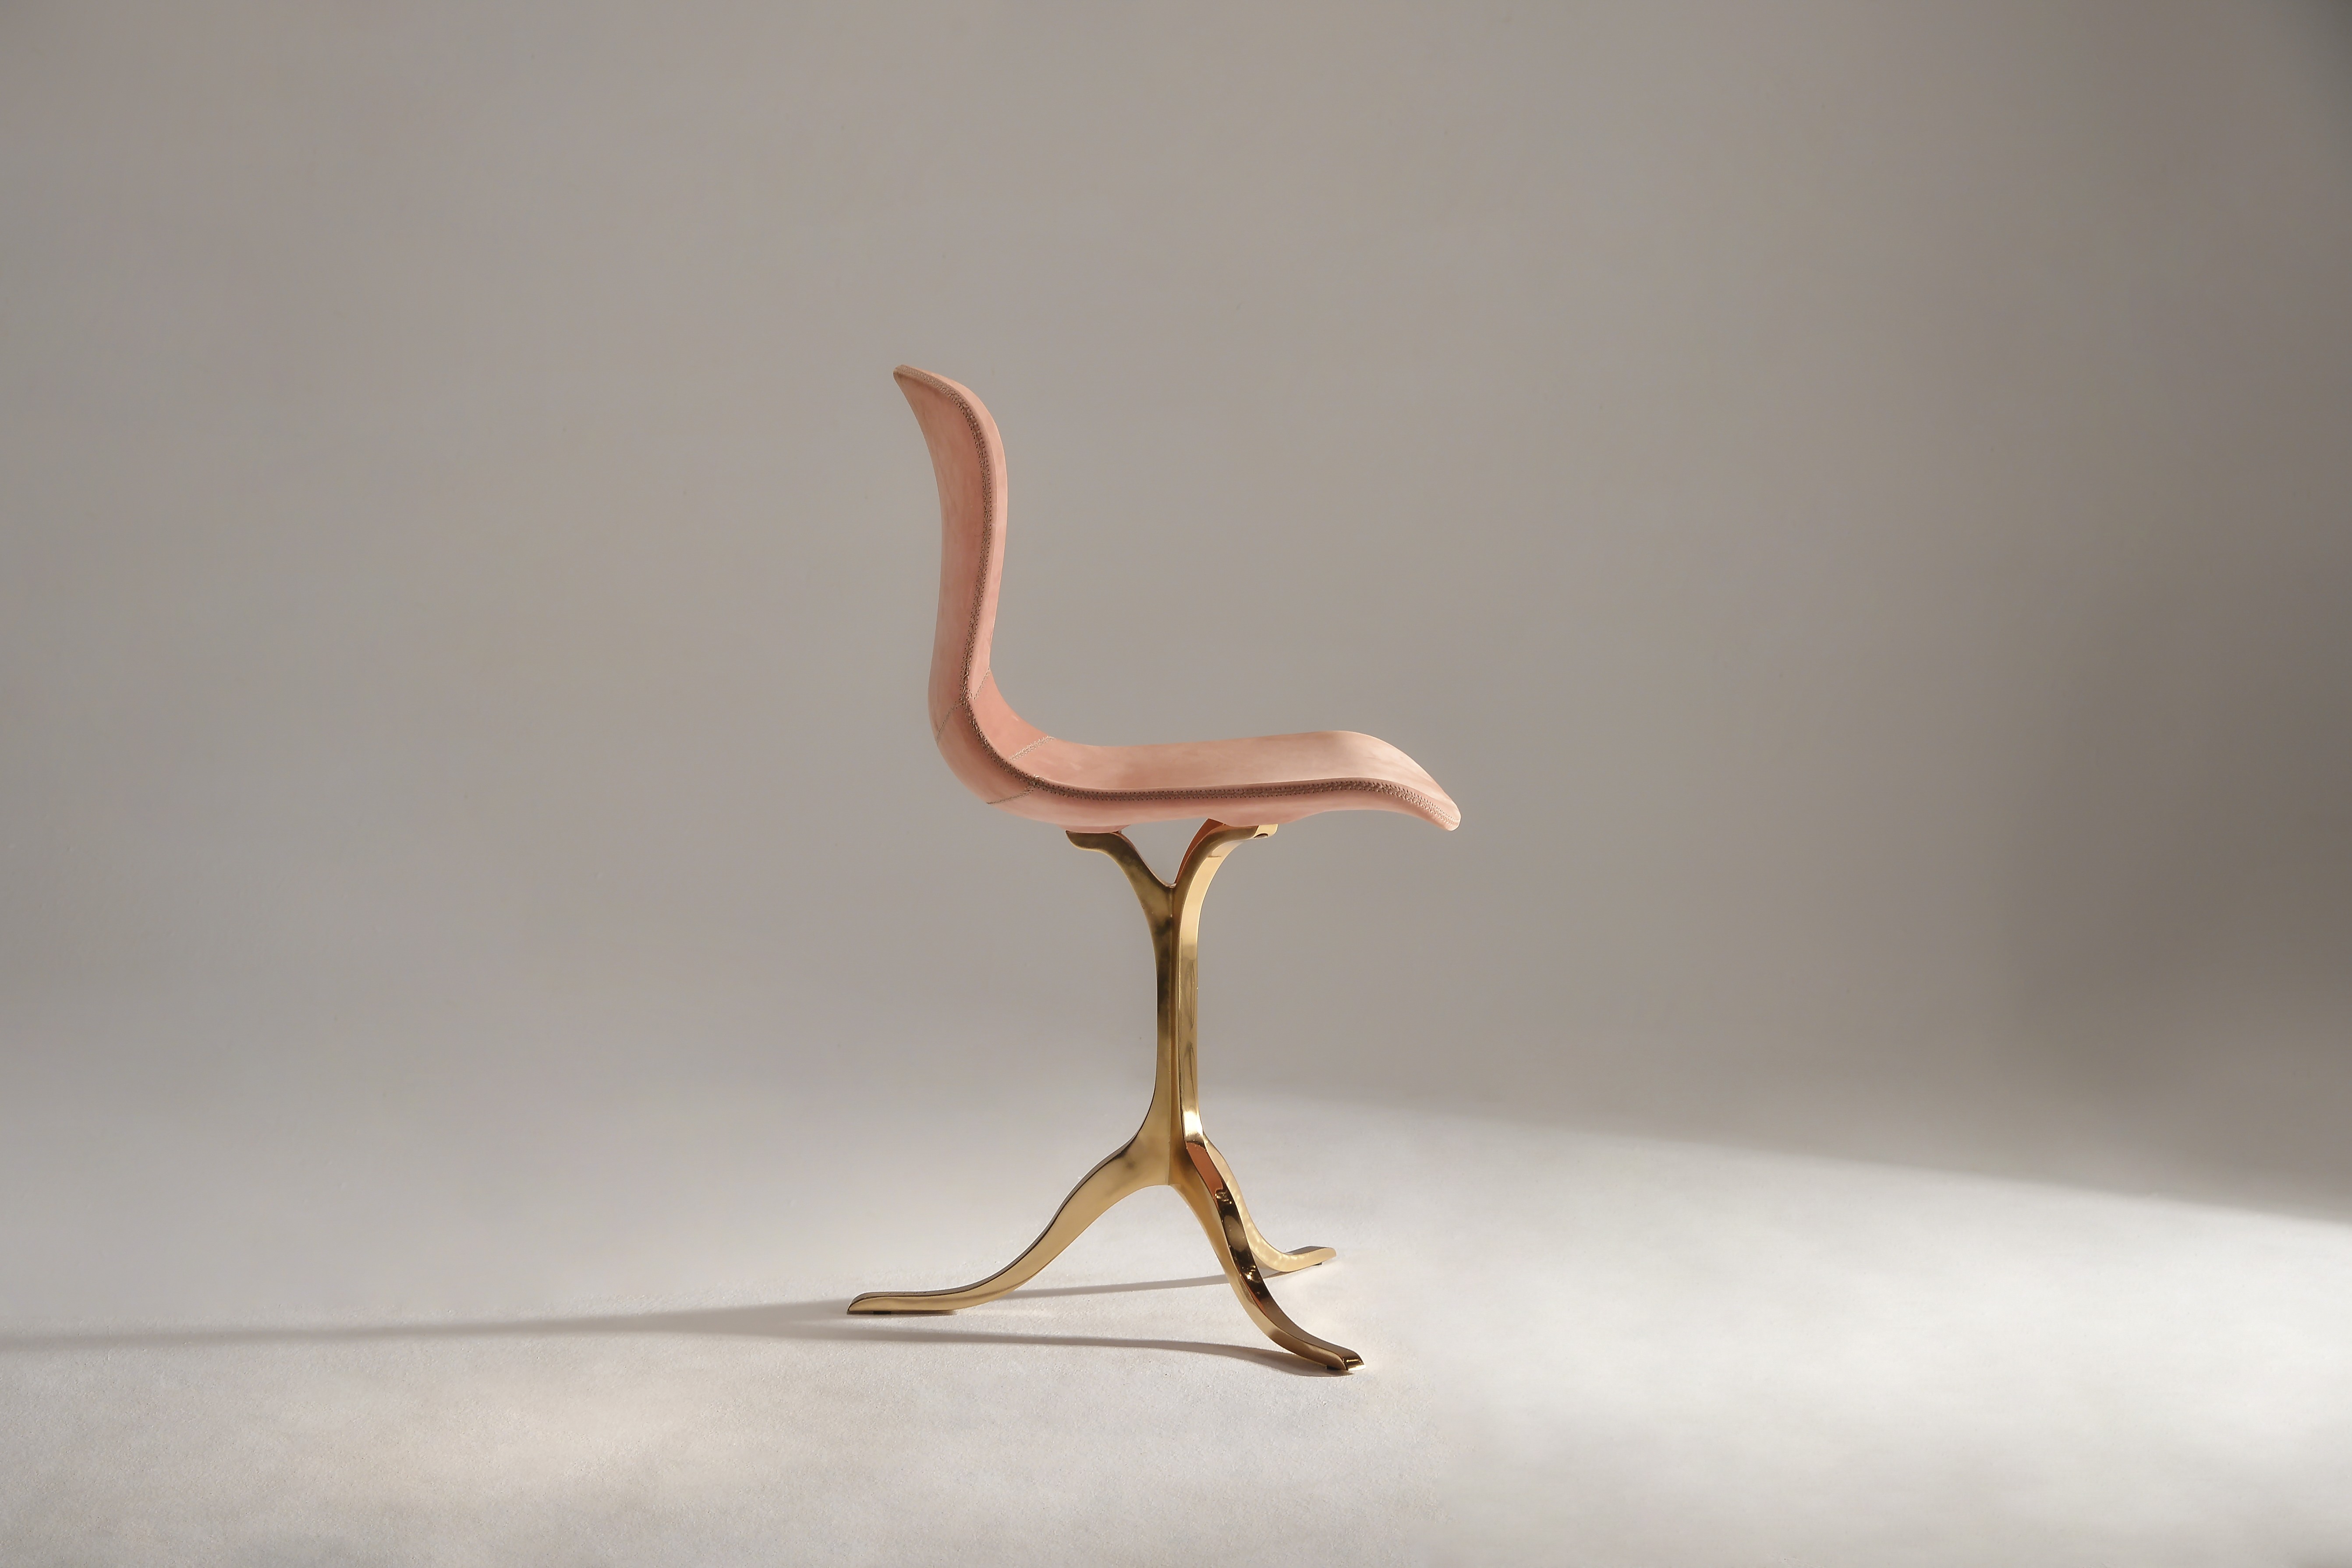 Feast your eyes on this fine collection, from the US$120 Gladys Chair to the more than US$2,000 Vieux Rose